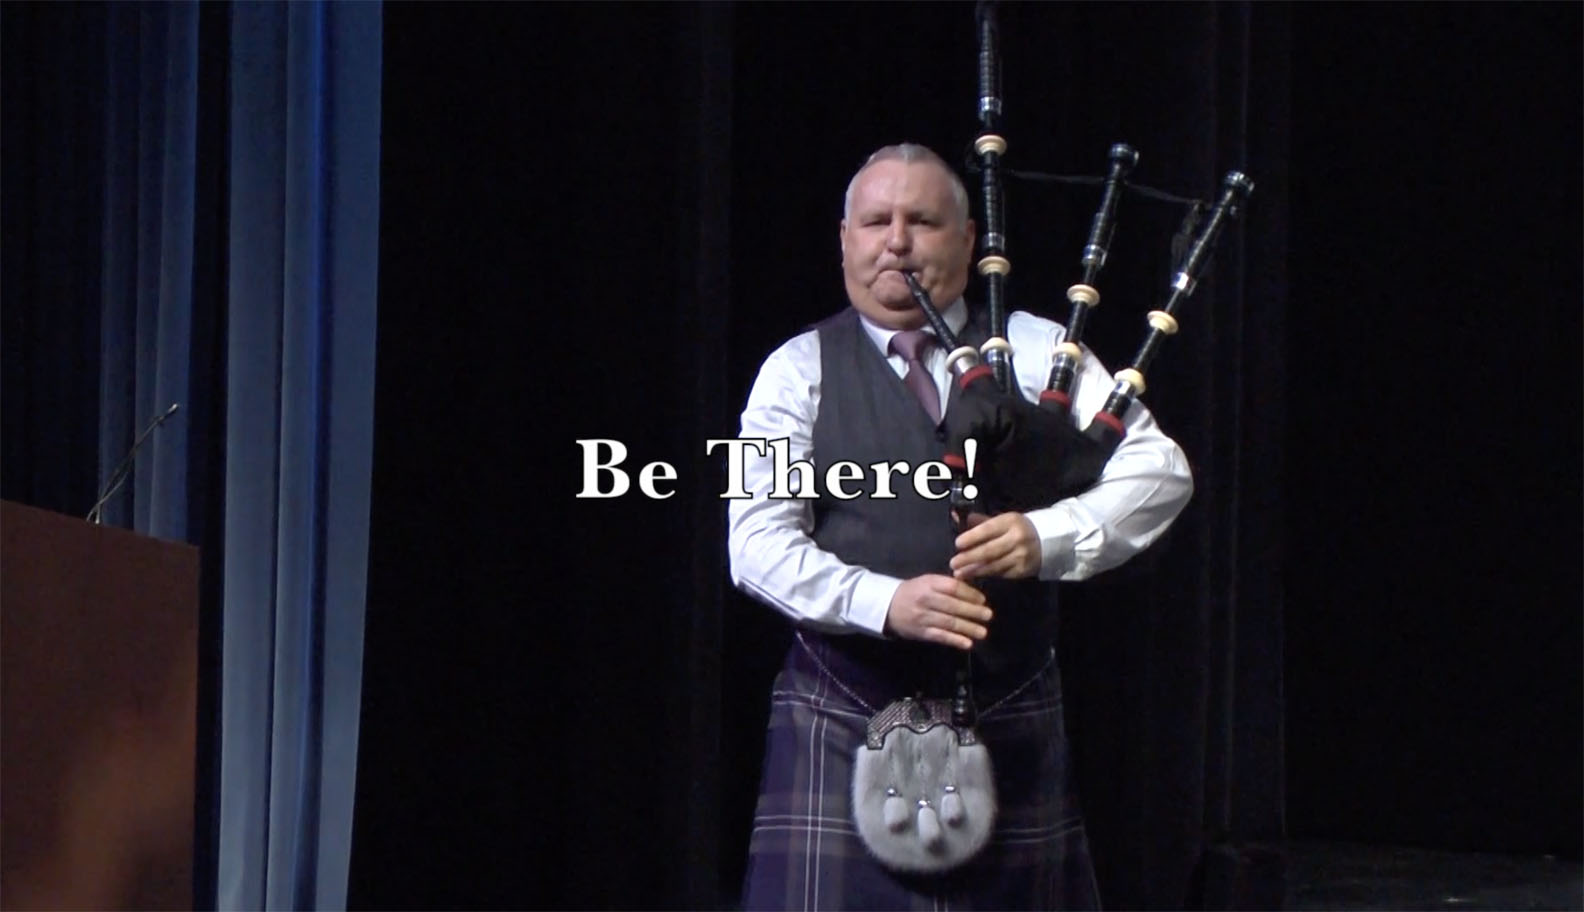 Robert Mathieson to teach at the Balmoral School of Piping's 2020 Summer Schools.